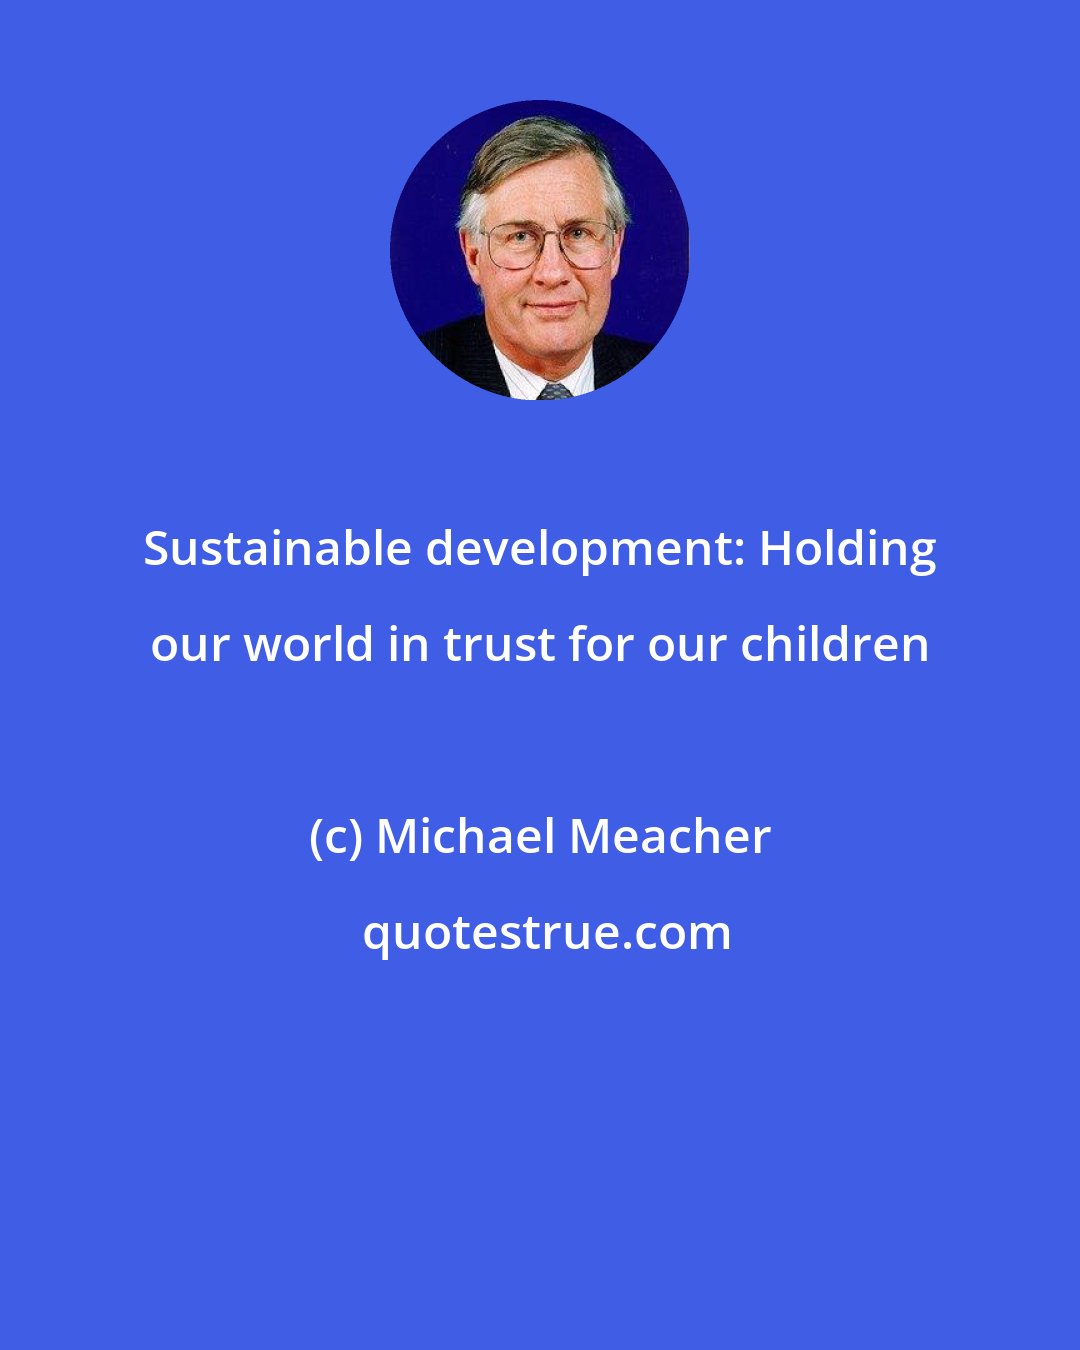 Michael Meacher: Sustainable development: Holding our world in trust for our children